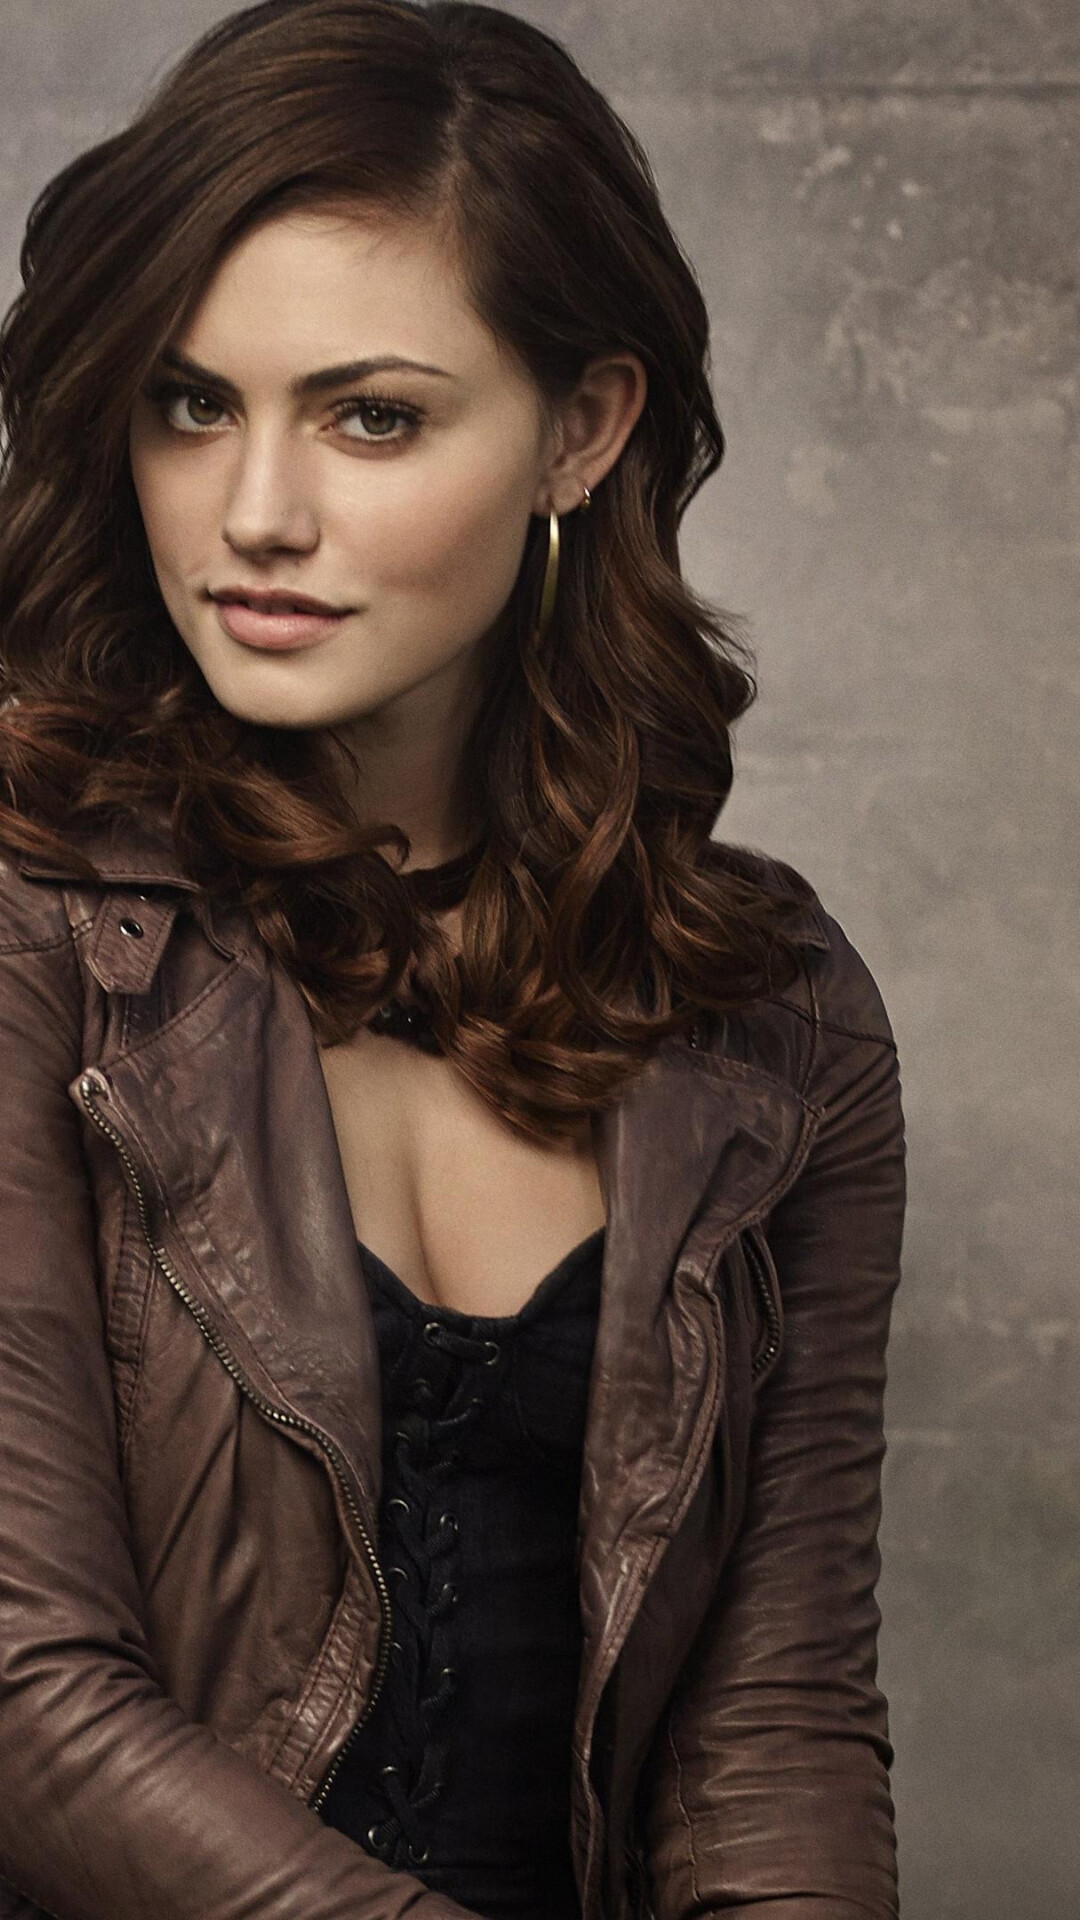 The Originals (TV Series): Phoebe Tonkin as Hayley Marshall, The long-lost alpha of her werewolf bloodline. 1080x1920 Full HD Wallpaper.